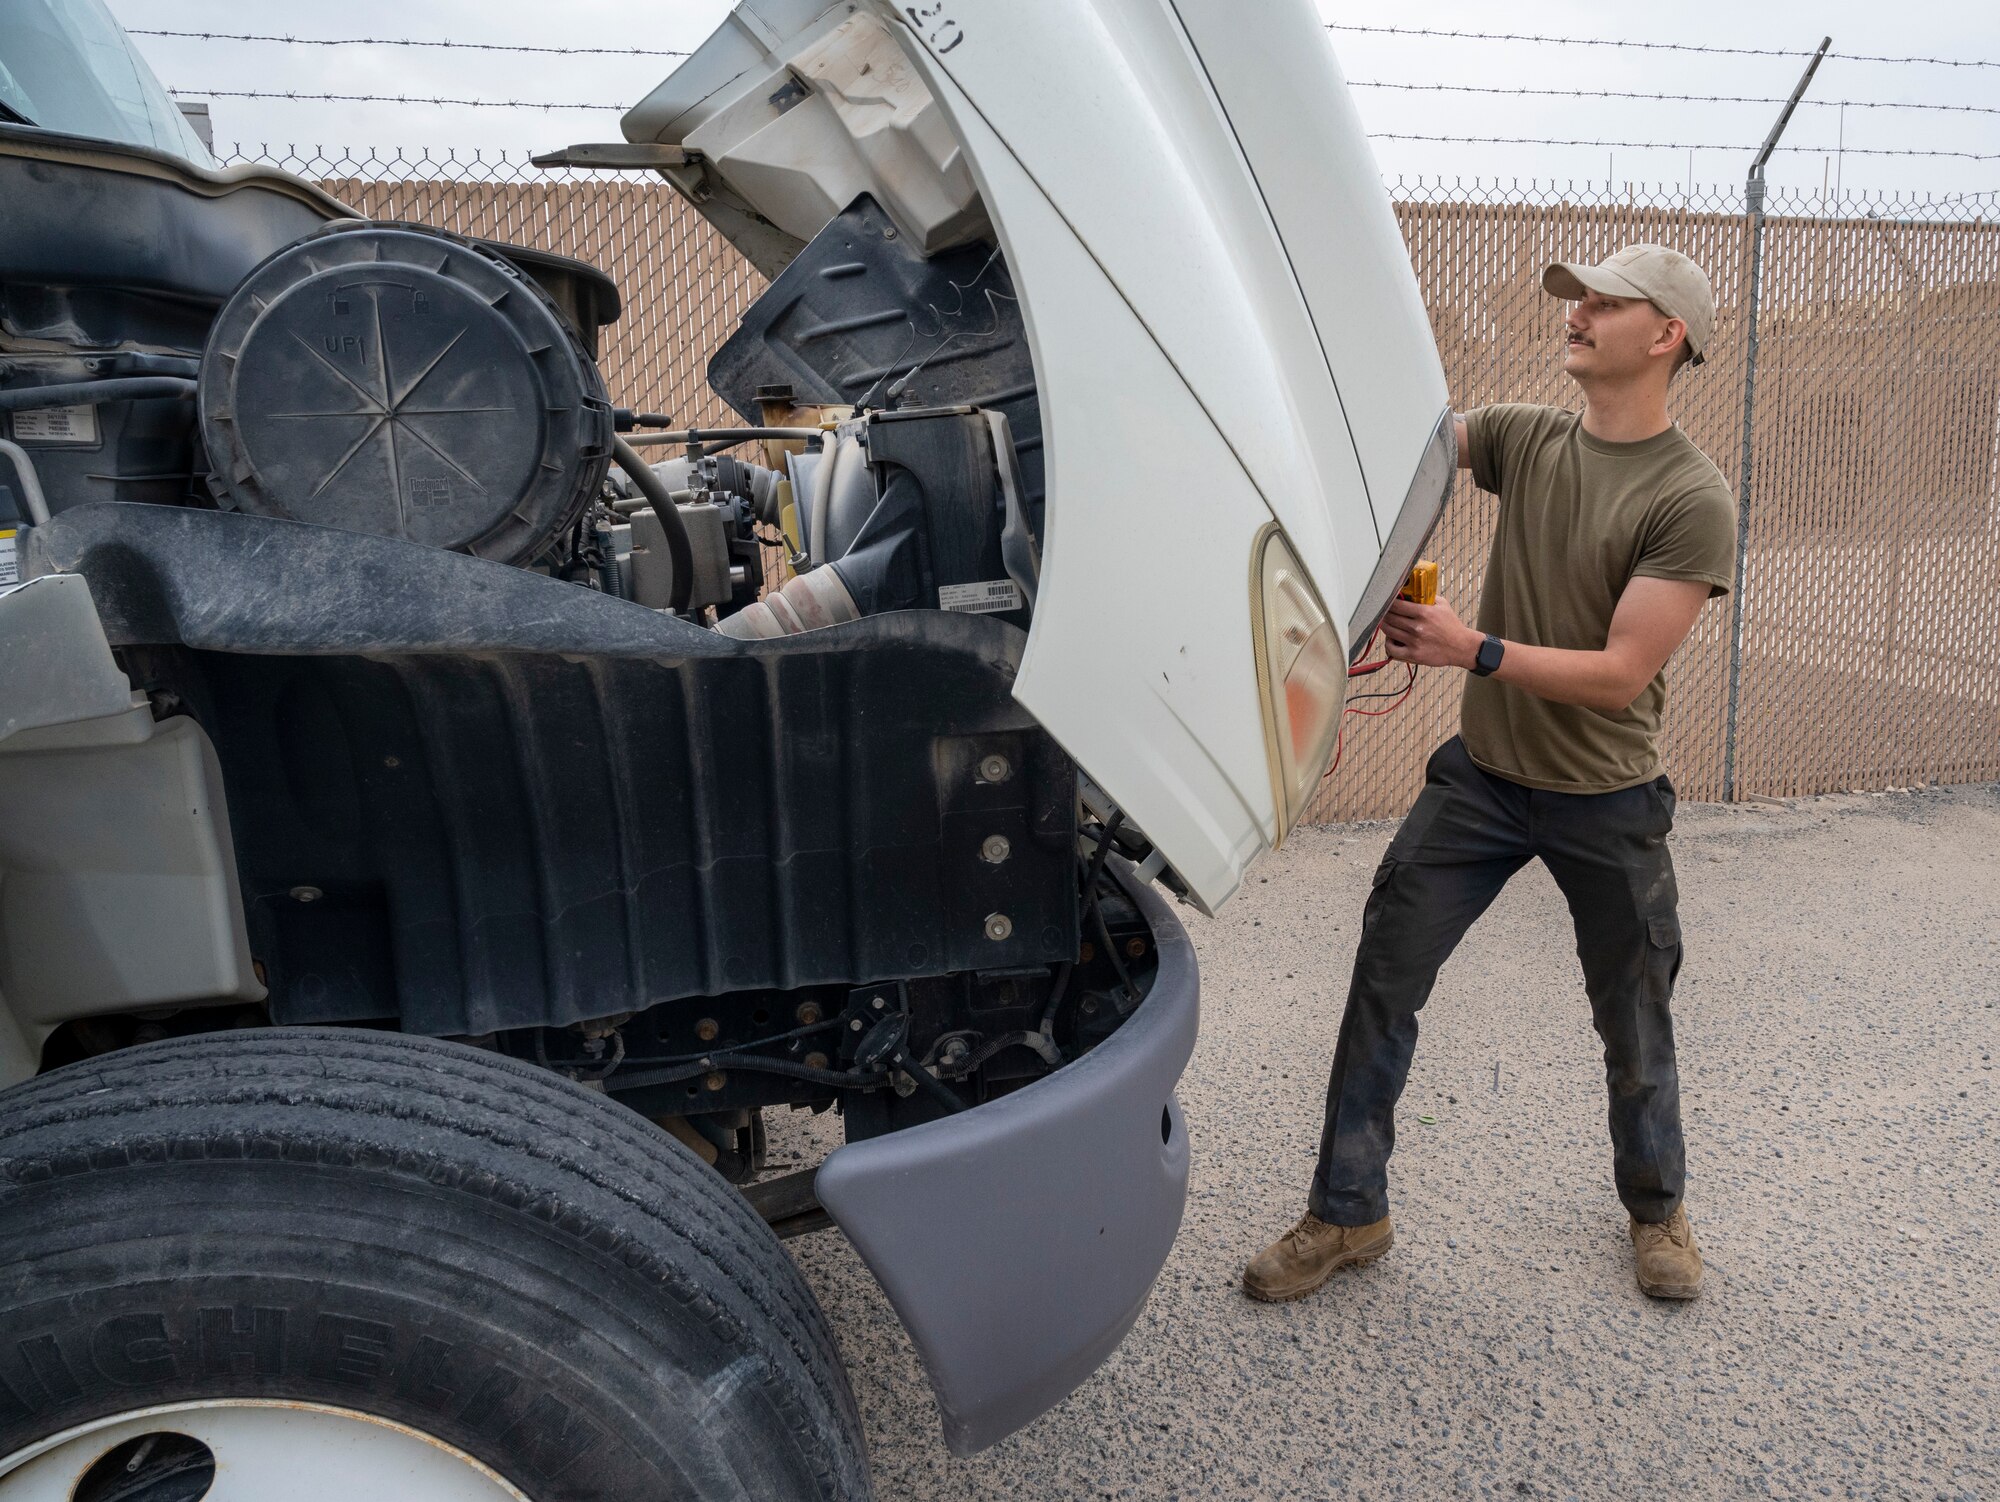 U.S. Air Force Airman 1st Class Kristopher Wilcott, a 386th Expeditionary Logistics Readiness Squadron vehicle management specialist, opens the engine bay of a wrecker at Ali Al Salem Air Base, Kuwait, March 8, 2023.